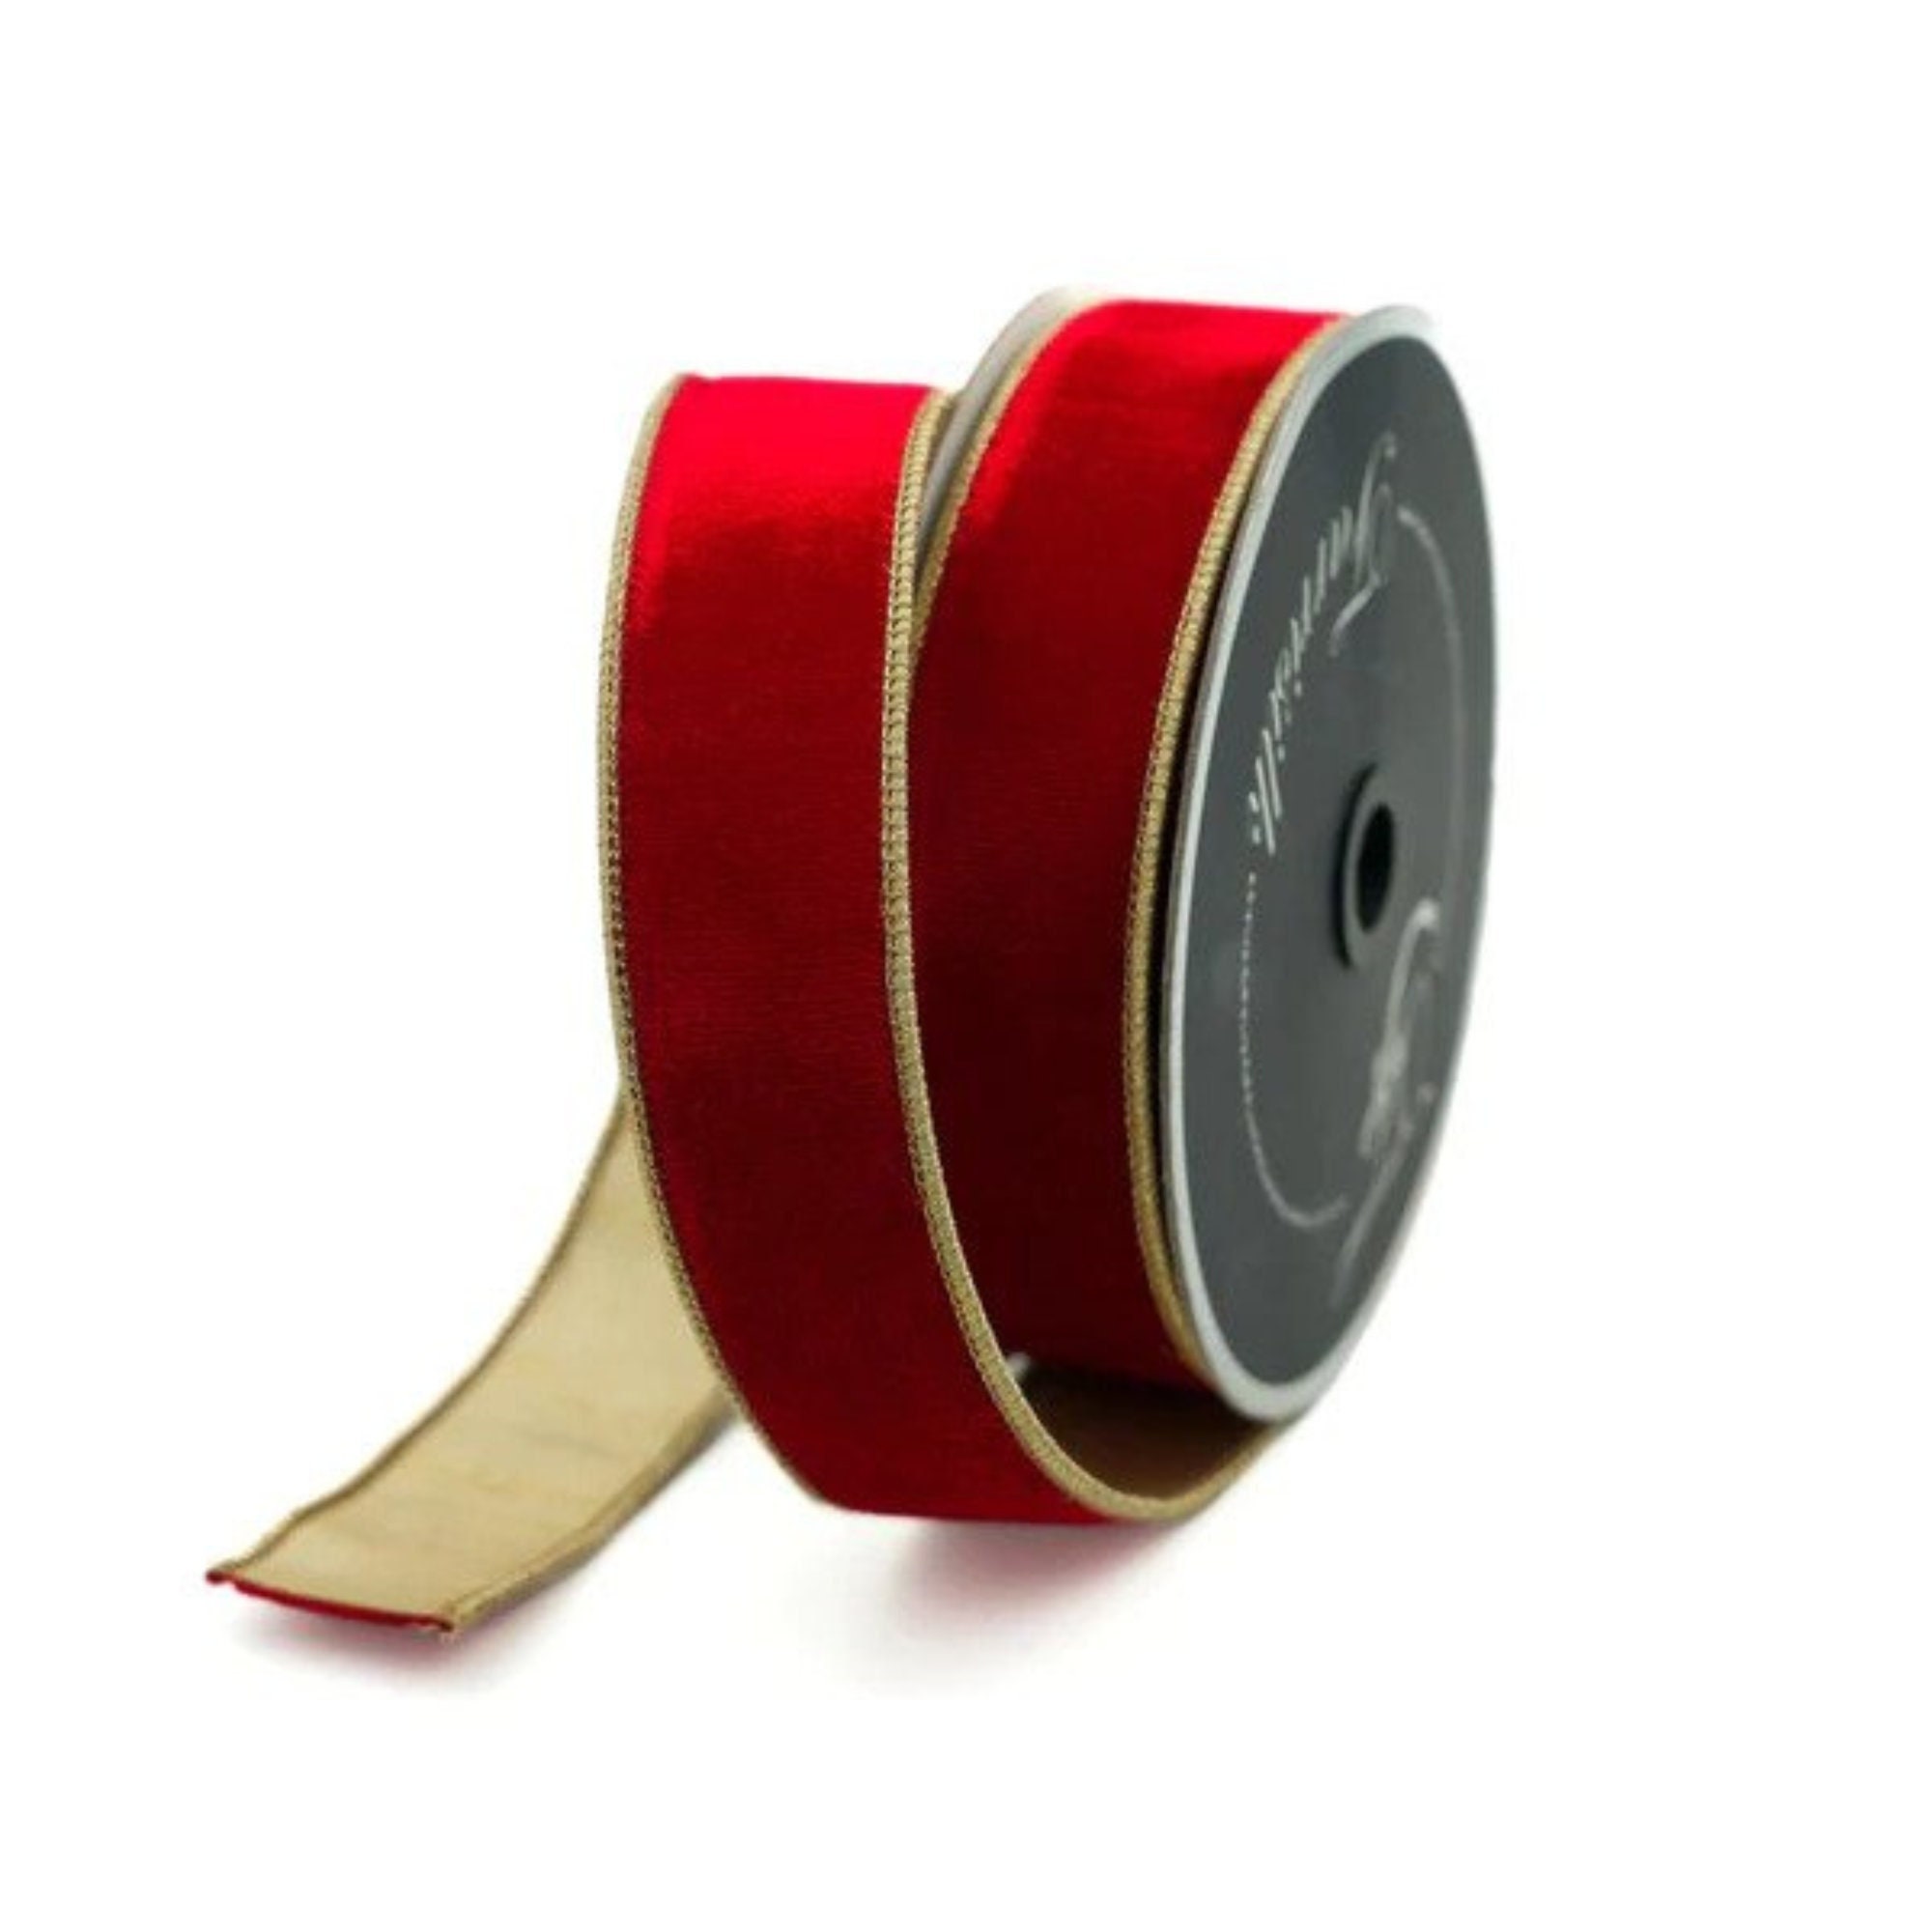 Paper Mart Velvet Ribbon for Holiday Gift Wrap & Crafting, Burgundy, 1 inch x 10 yd, Size: 1 x 10 yd, Red